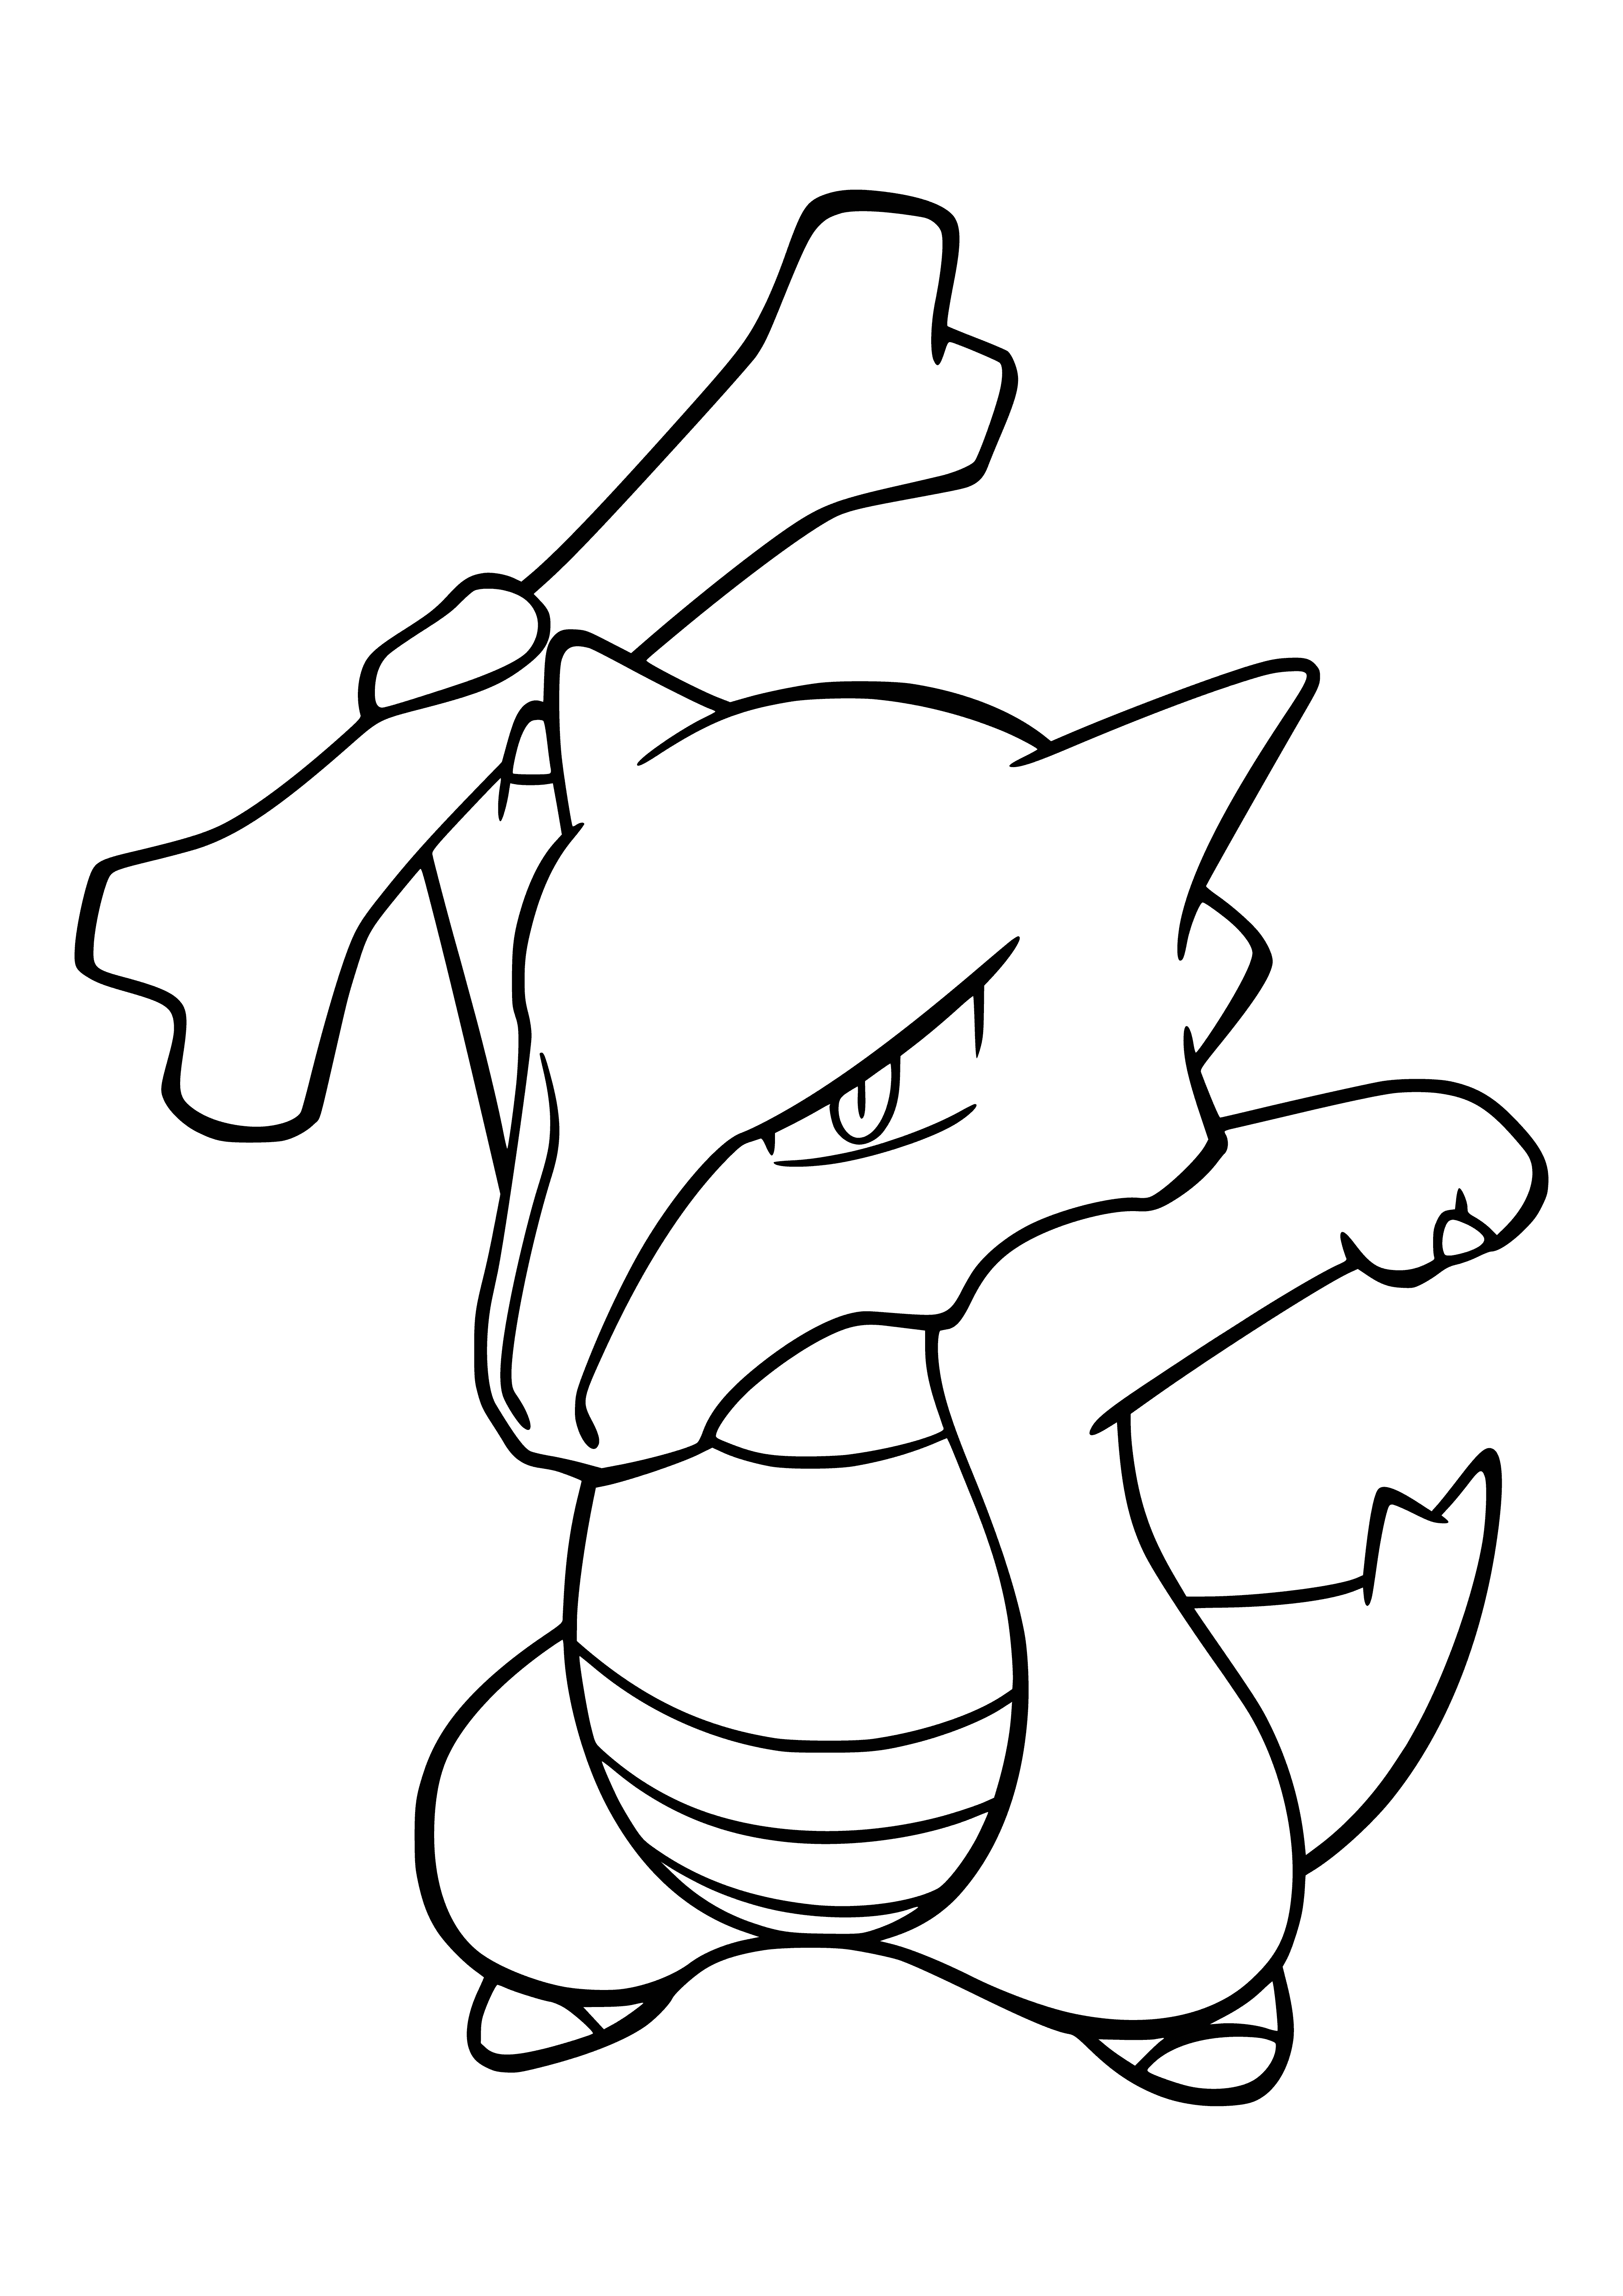 coloring page: Adorable Pokémon w/ brown fur, long tail, small head, black eyes, ears, mouth & toes; left hand holds white bone.